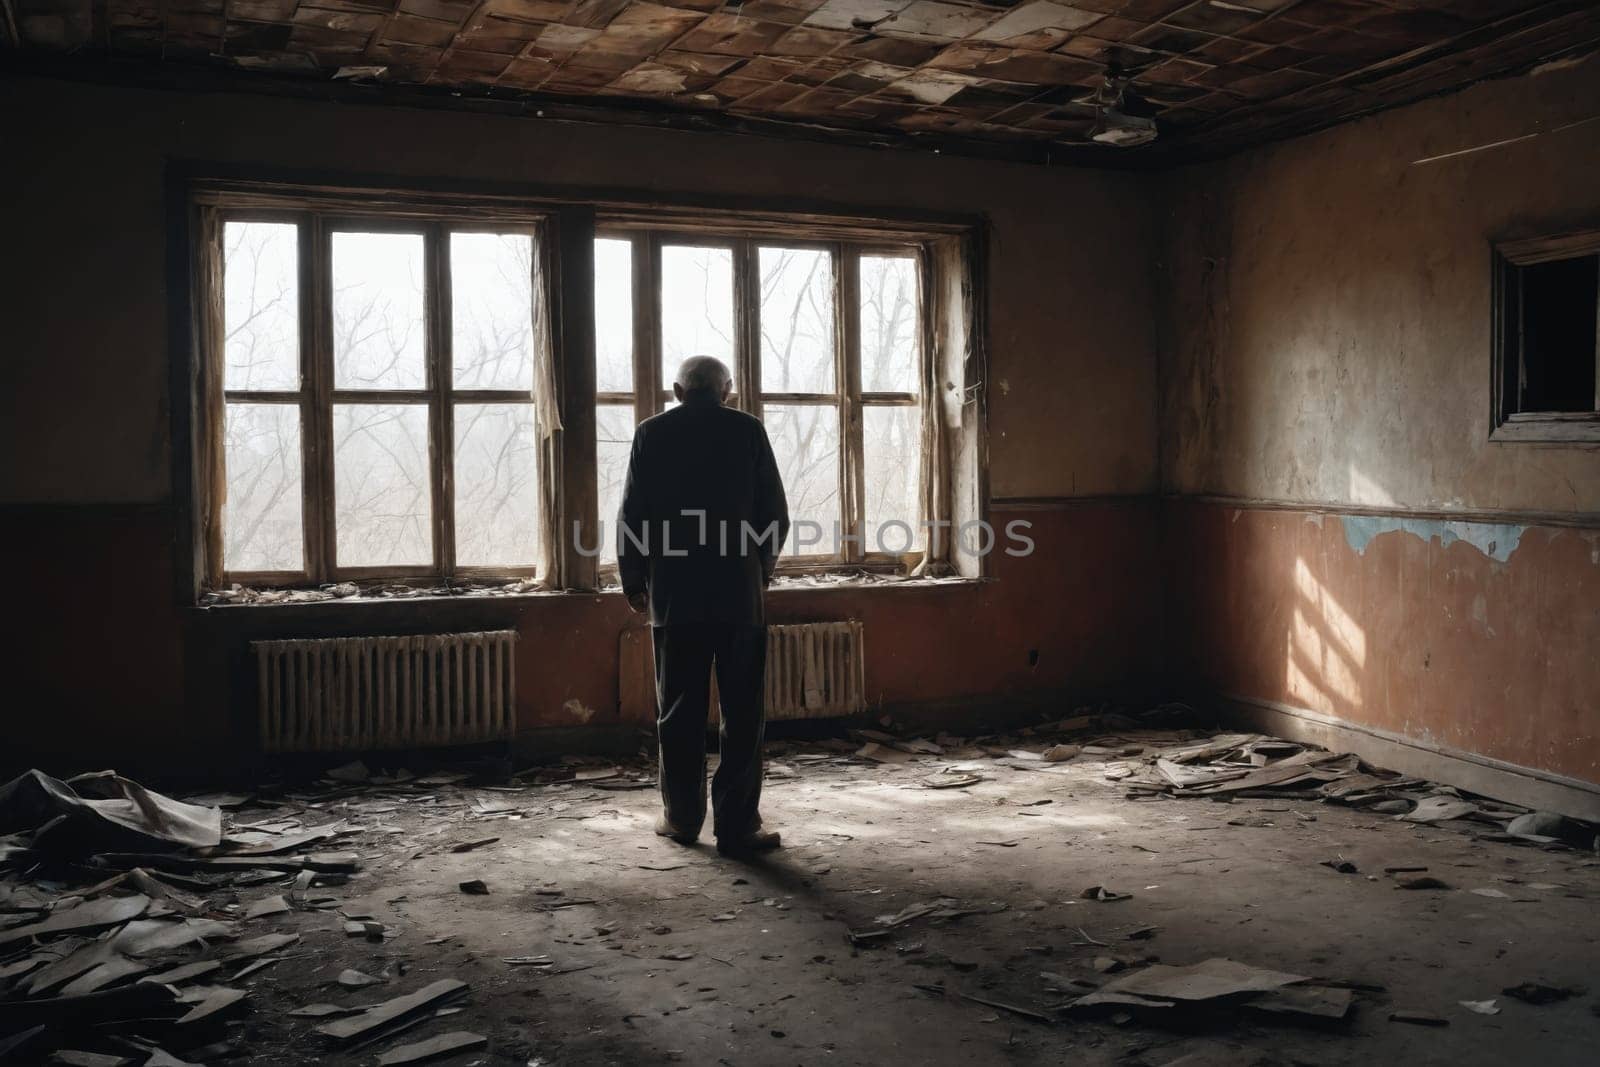 This atmospheric image depicts an individual in a dark coat, standing in a largely dilapidated room. The peeling paint, debris, and worn textures form a narrative of neglect and abandonment, starkly illuminated by the light from the large windows.